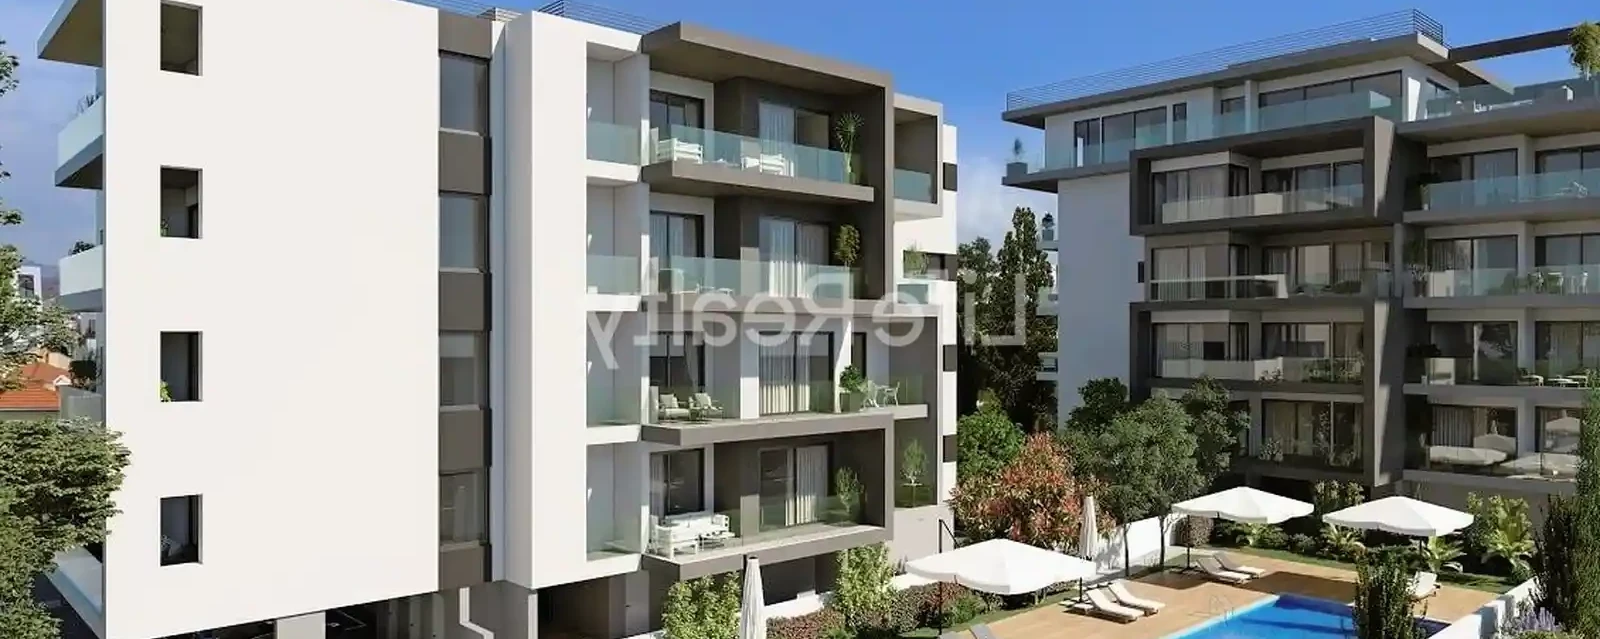 2-bedroom apartment fоr sаle €455.000, image 1